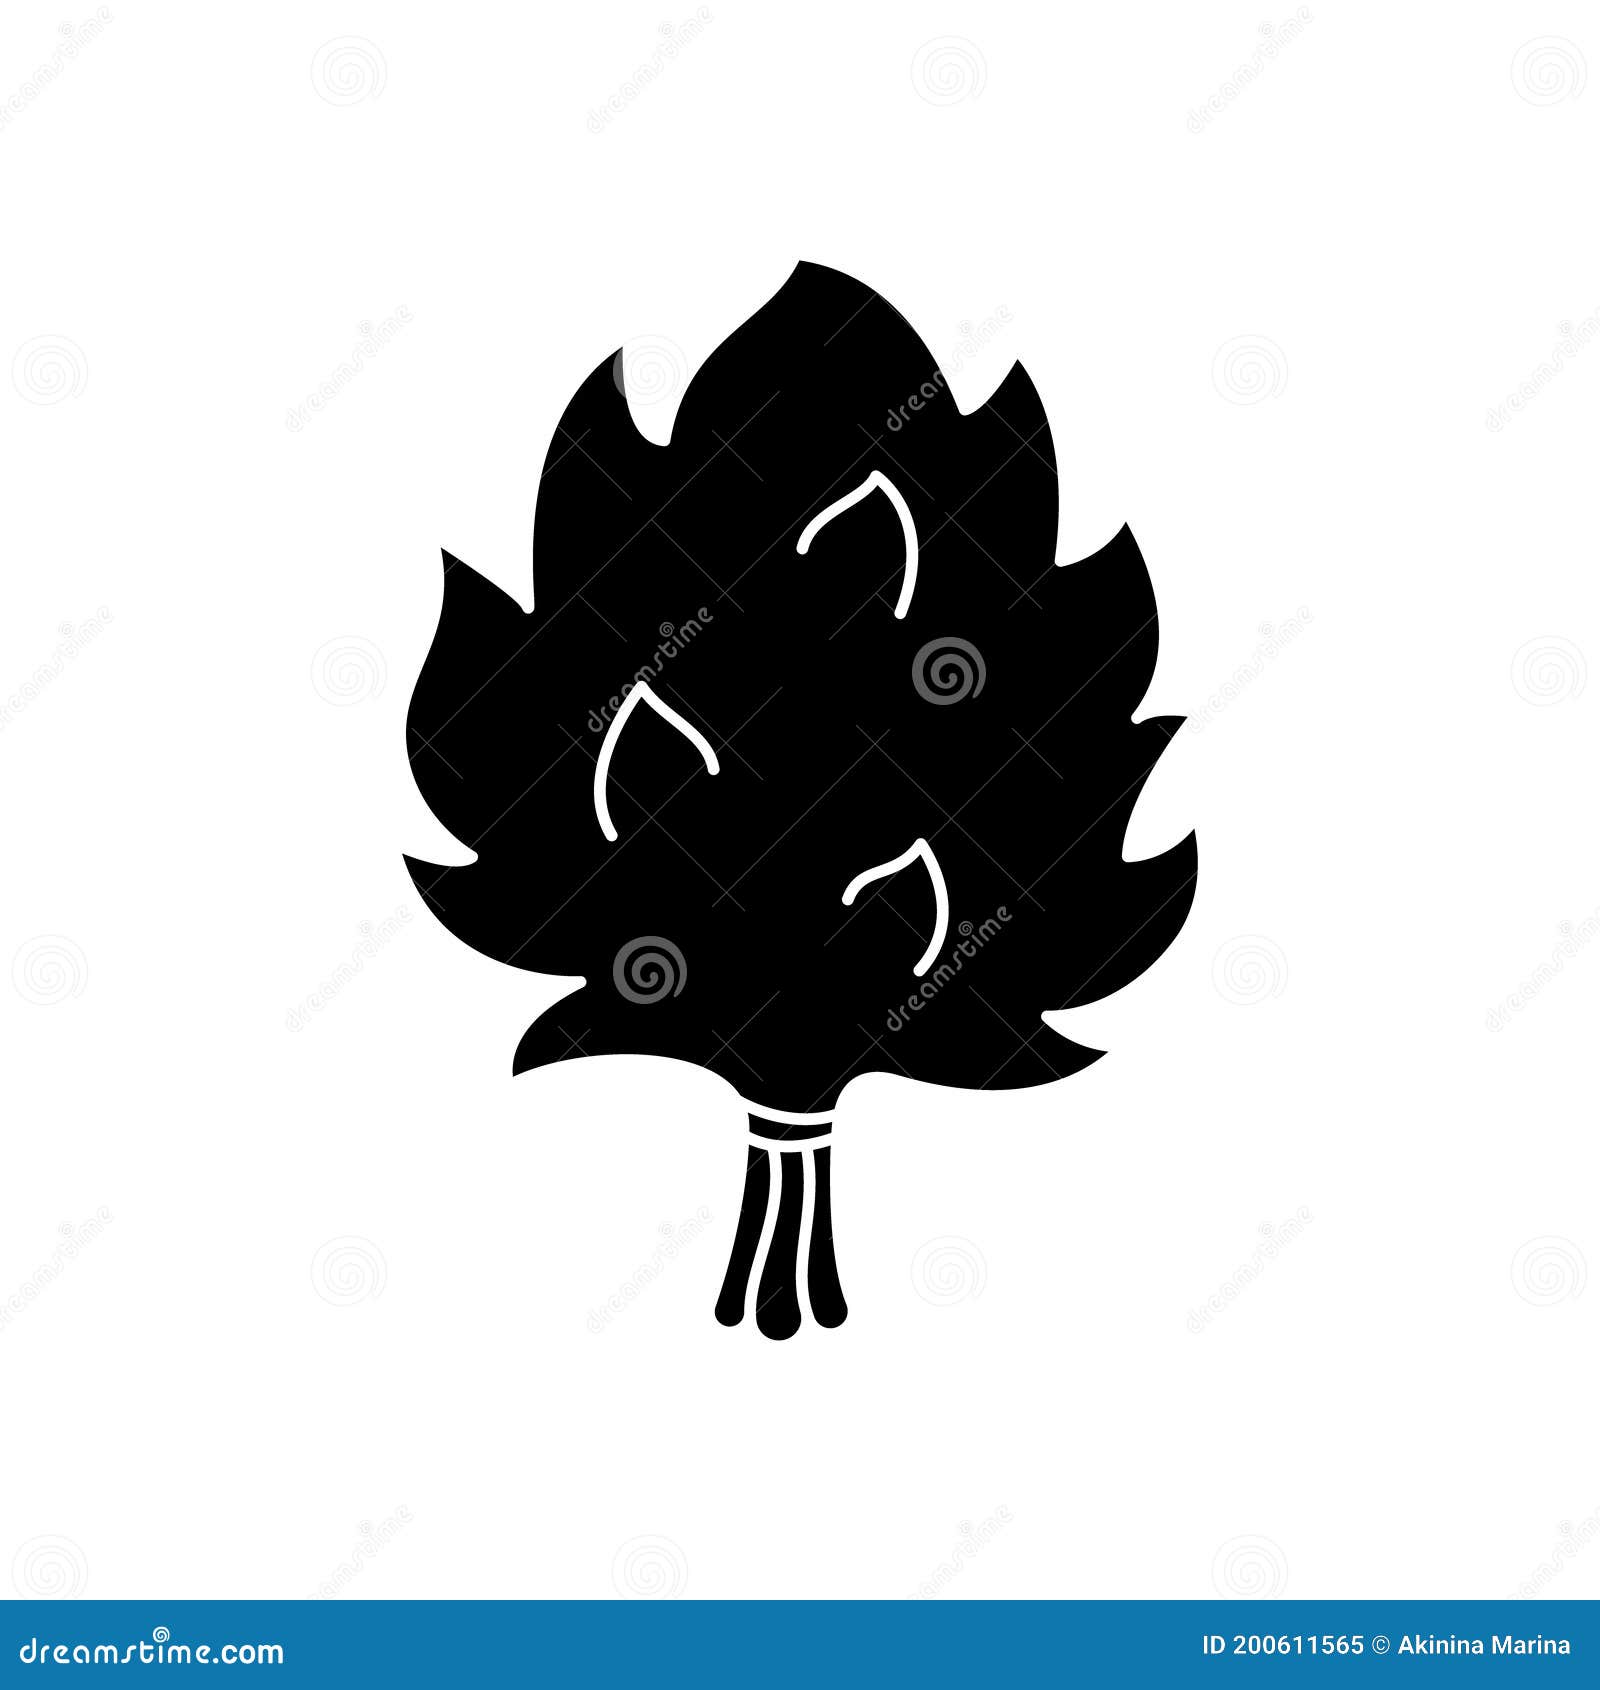 https://thumbs.dreamstime.com/z/bath-whisk-leaves-silhouette-sauna-broom-outline-icon-classic-accessory-russian-banya-black-simple-illustration-200611565.jpg